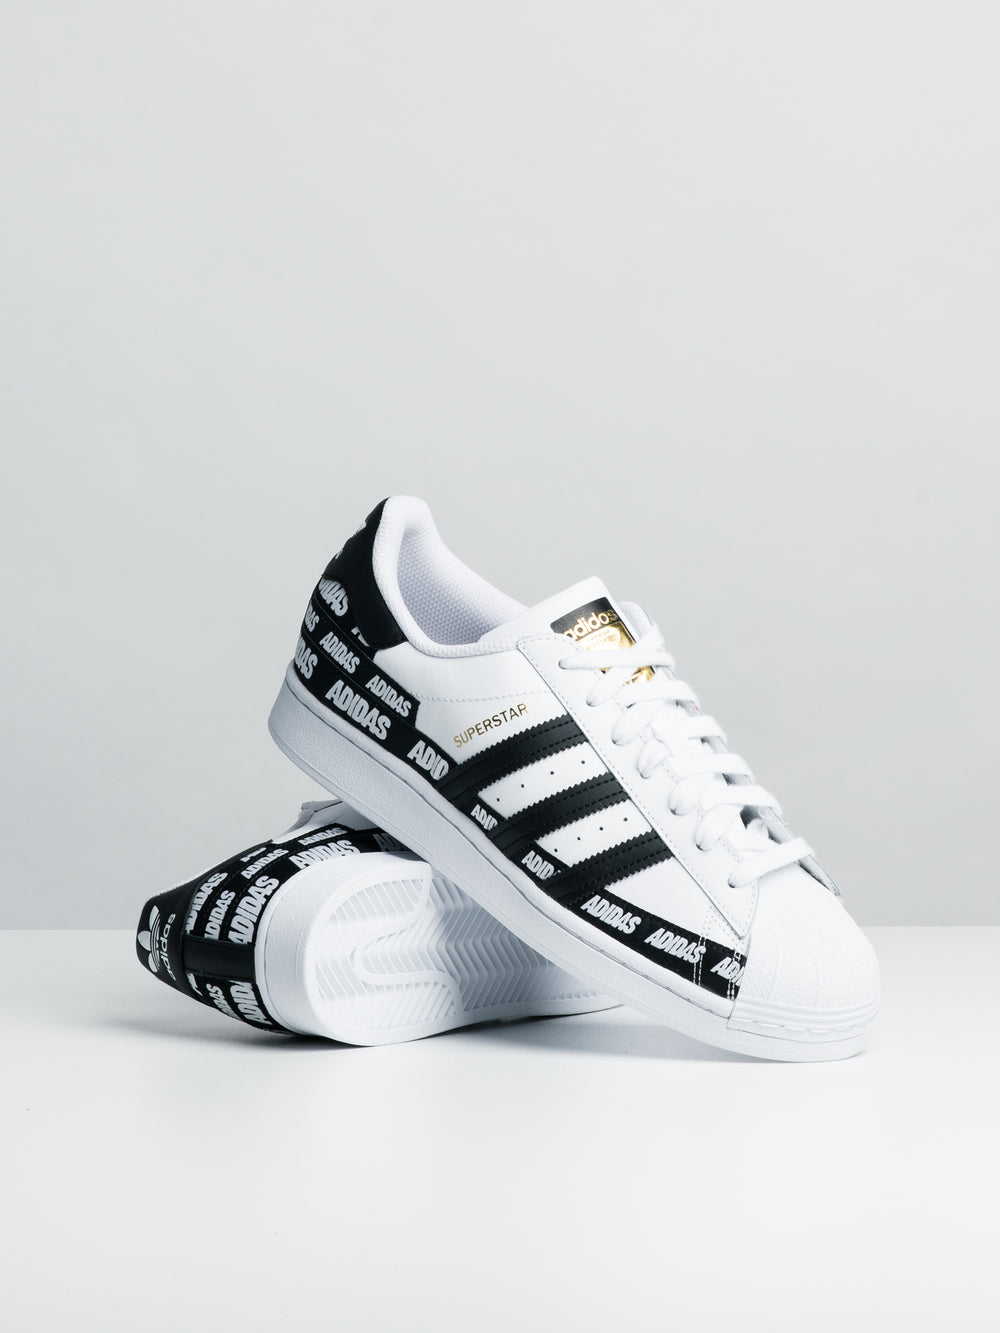 MENS ADIDAS SUPERSTAR SNEAKERS - WHITE/BLACK - CLEARANCE